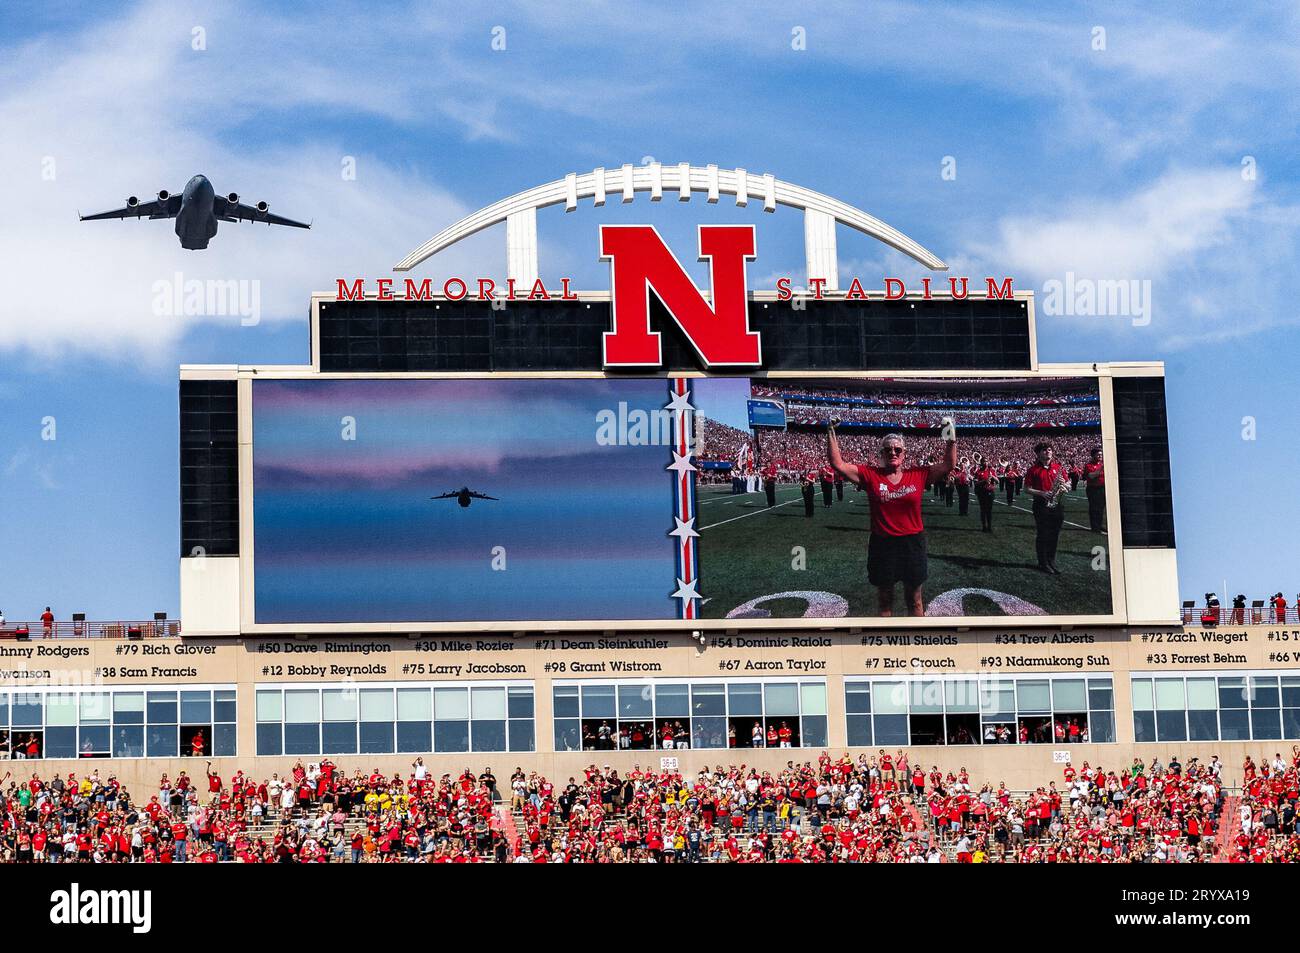 Lincoln, NE. U.S. 30th Sep, 2023. A United States Air Force C-17 Globemaster from Joint Base Elmendorf-Richardson, Alaska flys over Memorial Stadium in action during a NCAA Division 1 football game between #2 ranked Michigan Wolverines and the Nebraska Cornhuskers at Memorial Stadium in Lincoln, NE.Michigan won 45-7.Attendance: 87,134.392nd consecutive sellout.Michael Spomer/Cal Sport Media/Alamy Live News Stock Photo